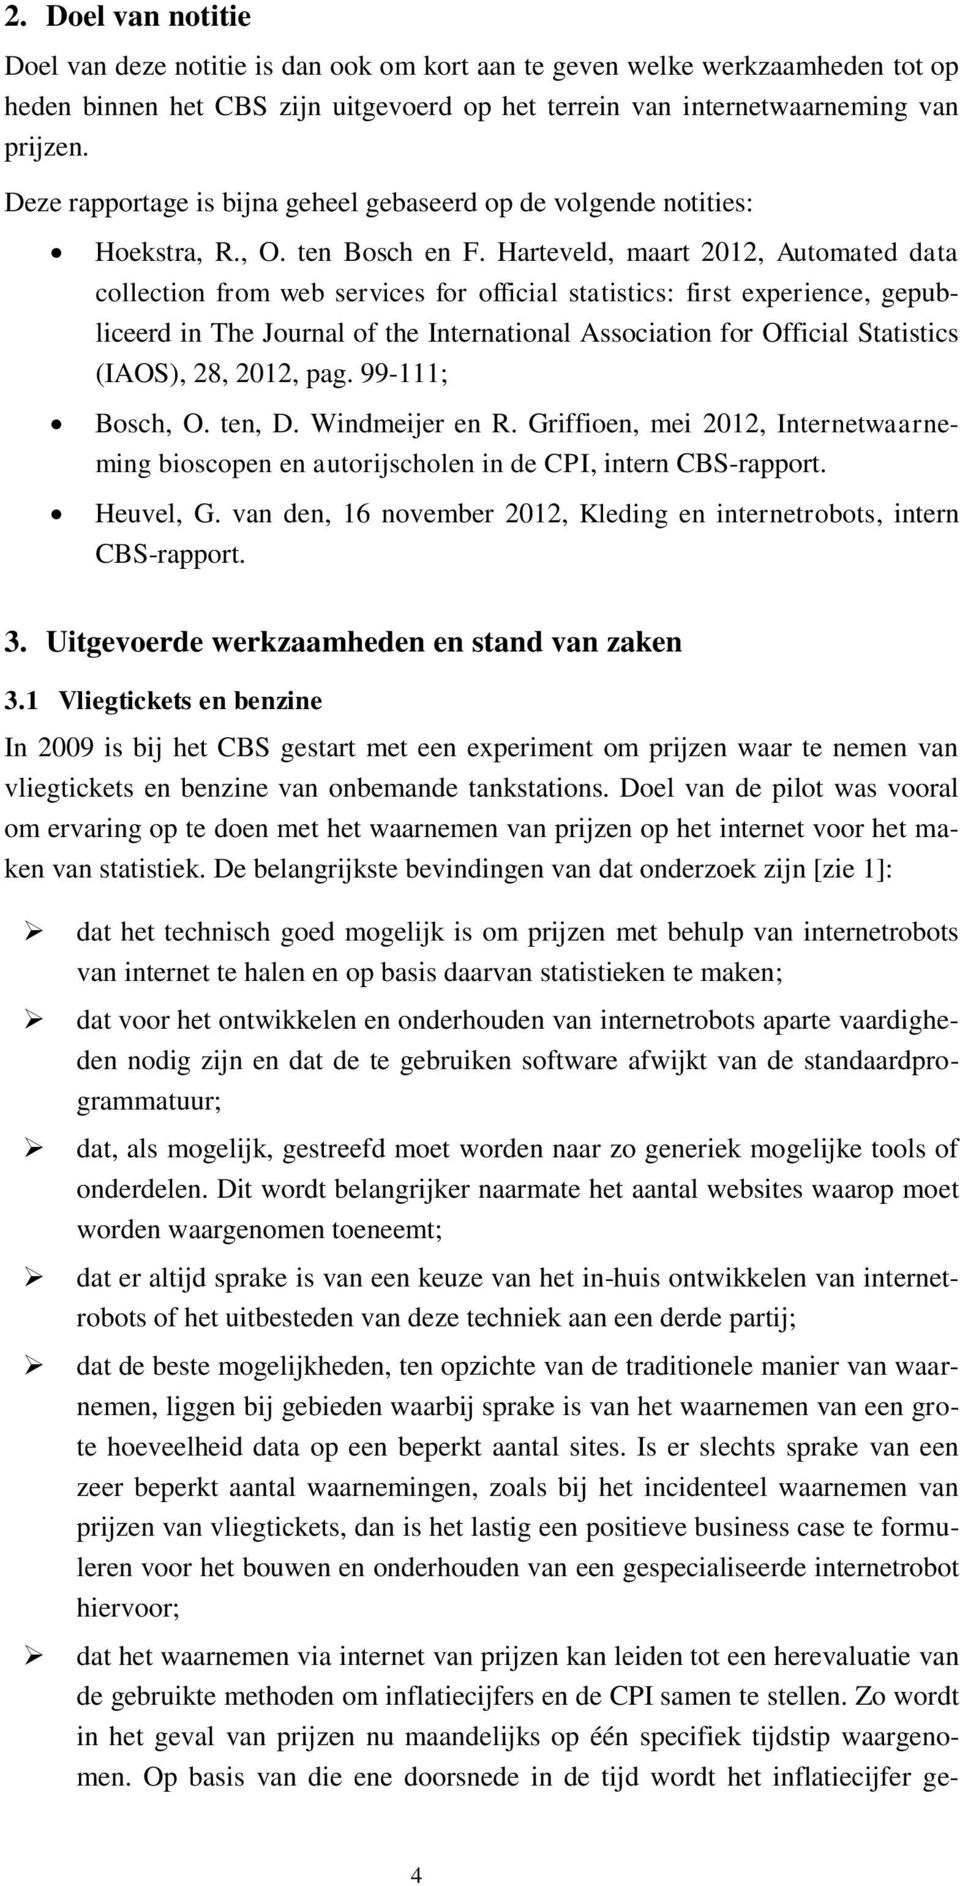 Harteveld, maart 2012, Automated data collection from web services for official statistics: first experience, gepubliceerd in The Journal of the International Association for Official Statistics